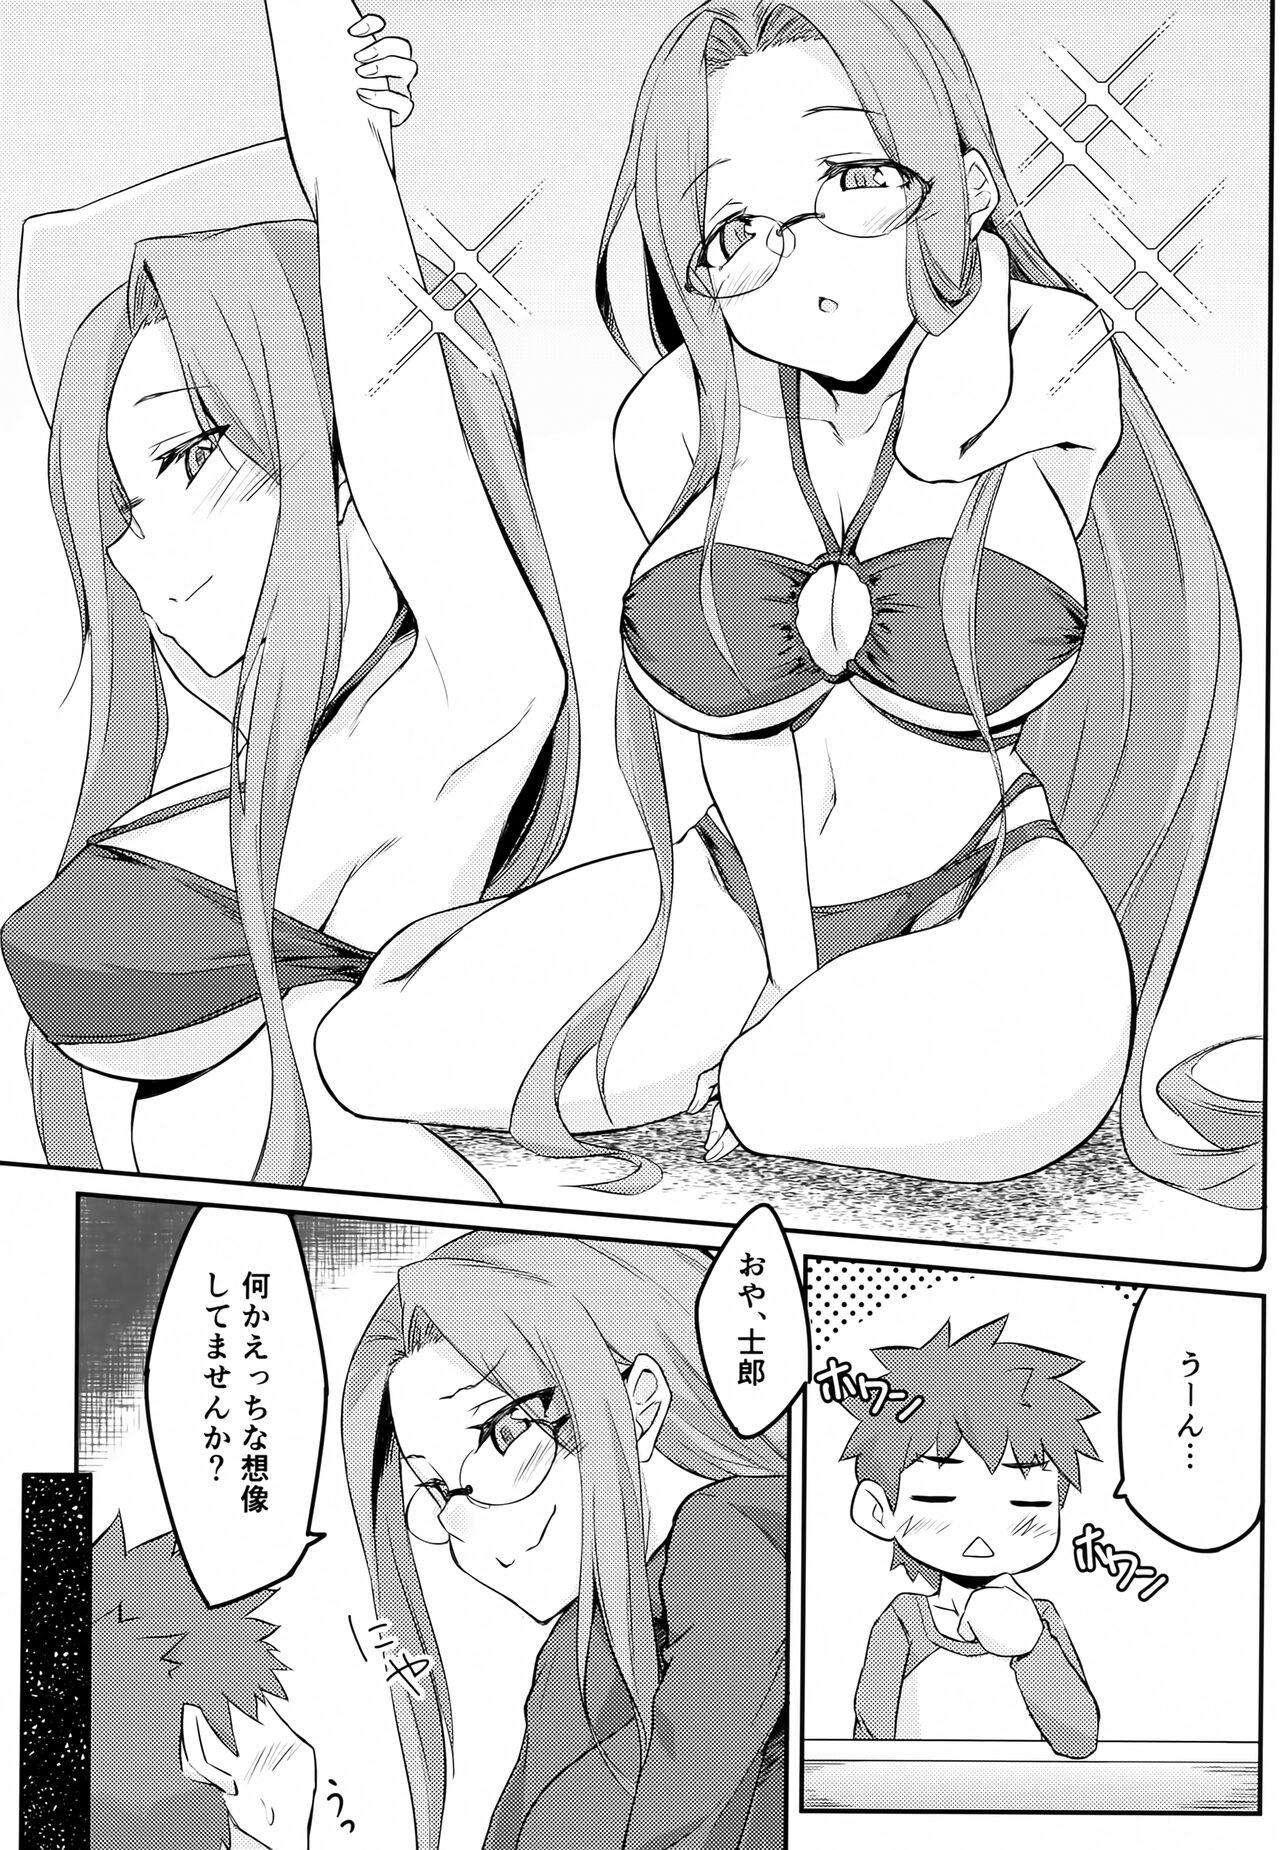 Tied R15 - Fate stay night Transexual - Page 6